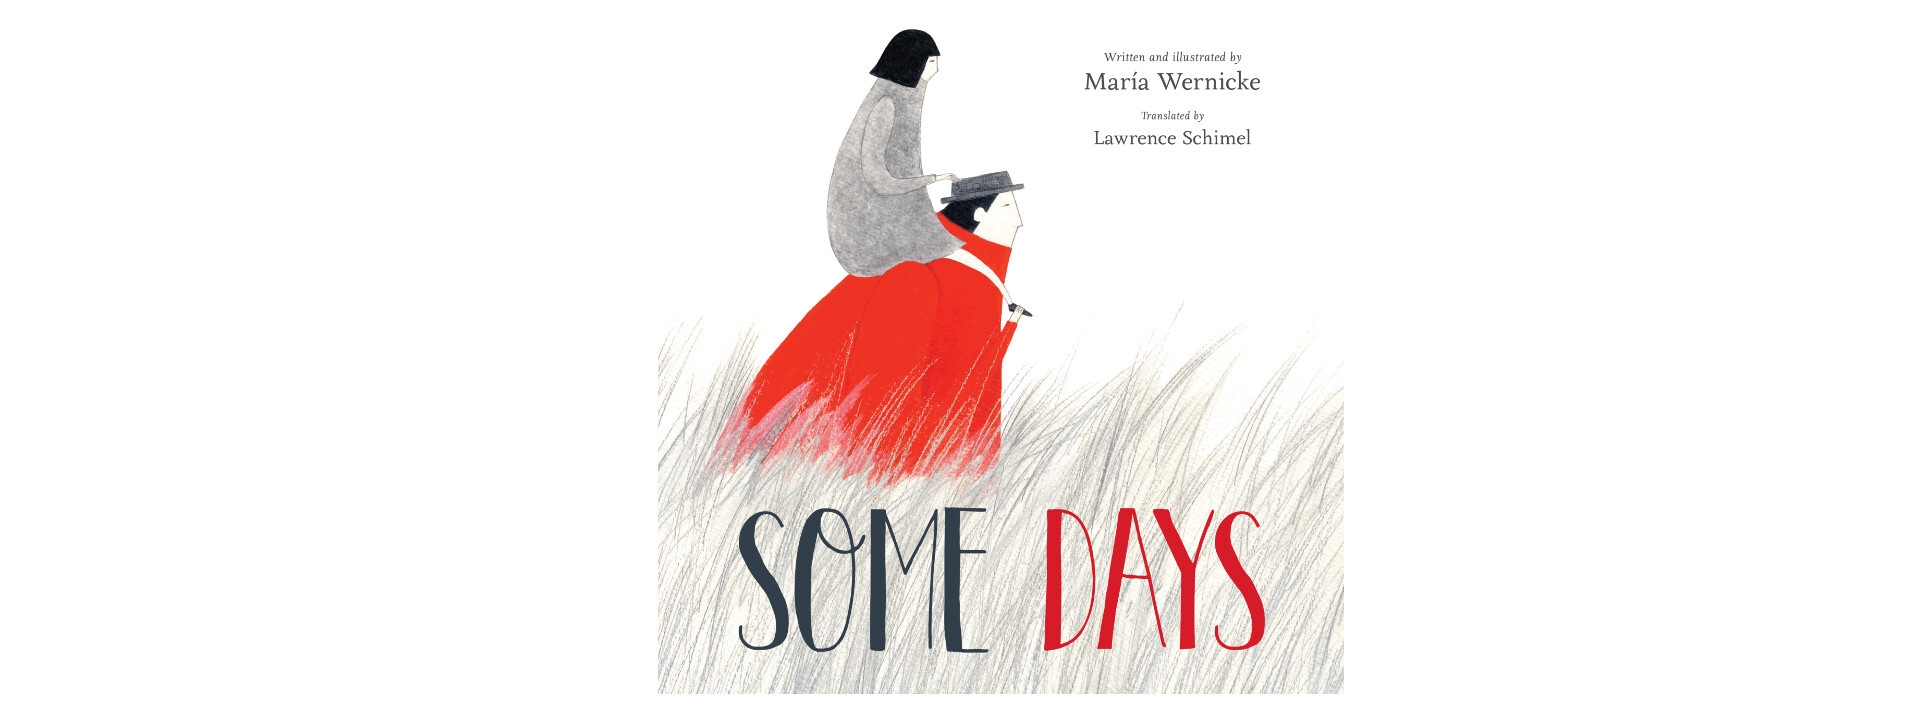 The book cover "Some Days" features a young girl with short dark hair wearing a gray jacket on the shoulders of an adult wearing a red jacket and gray hat. They are walking through tall grass.